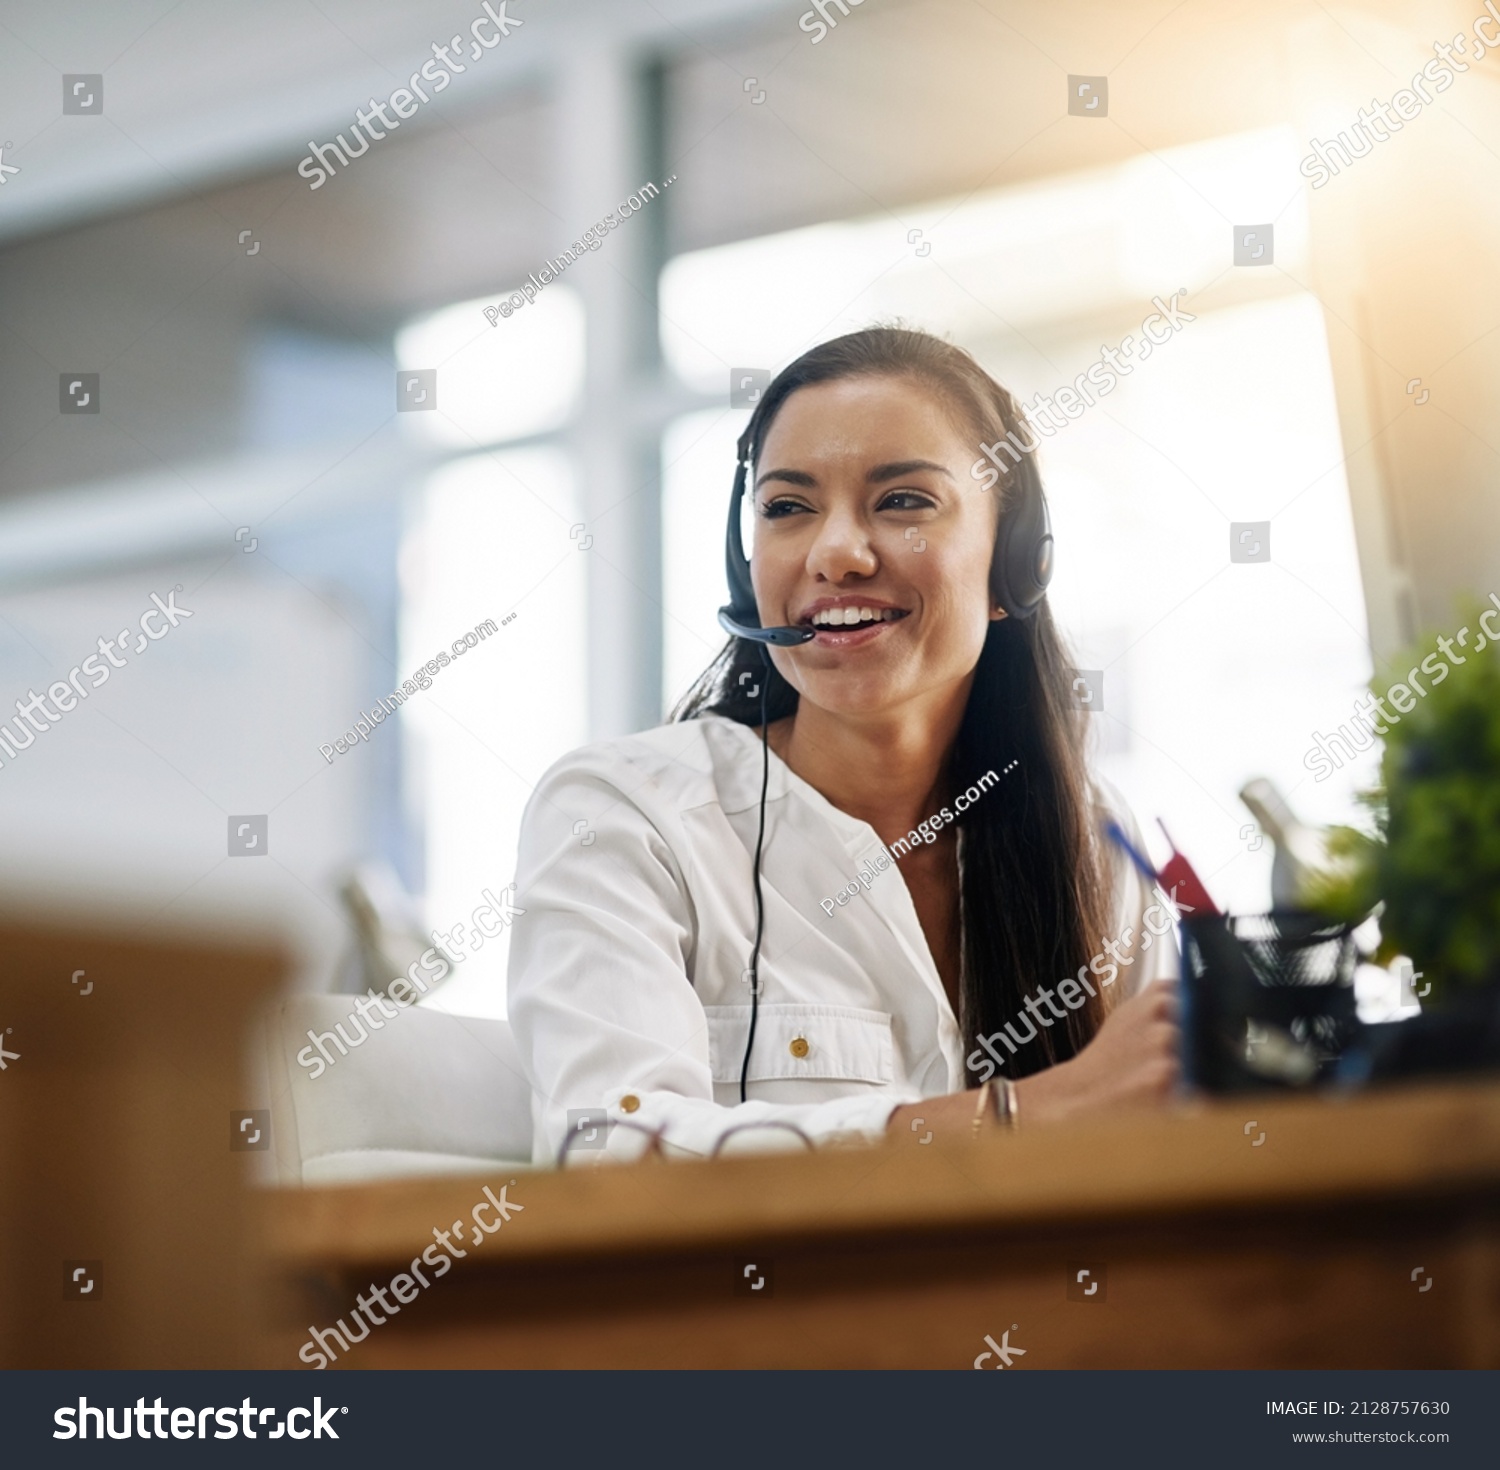 Be productive in helping customers. Shot of a female agent working in a call centre. #2128757630